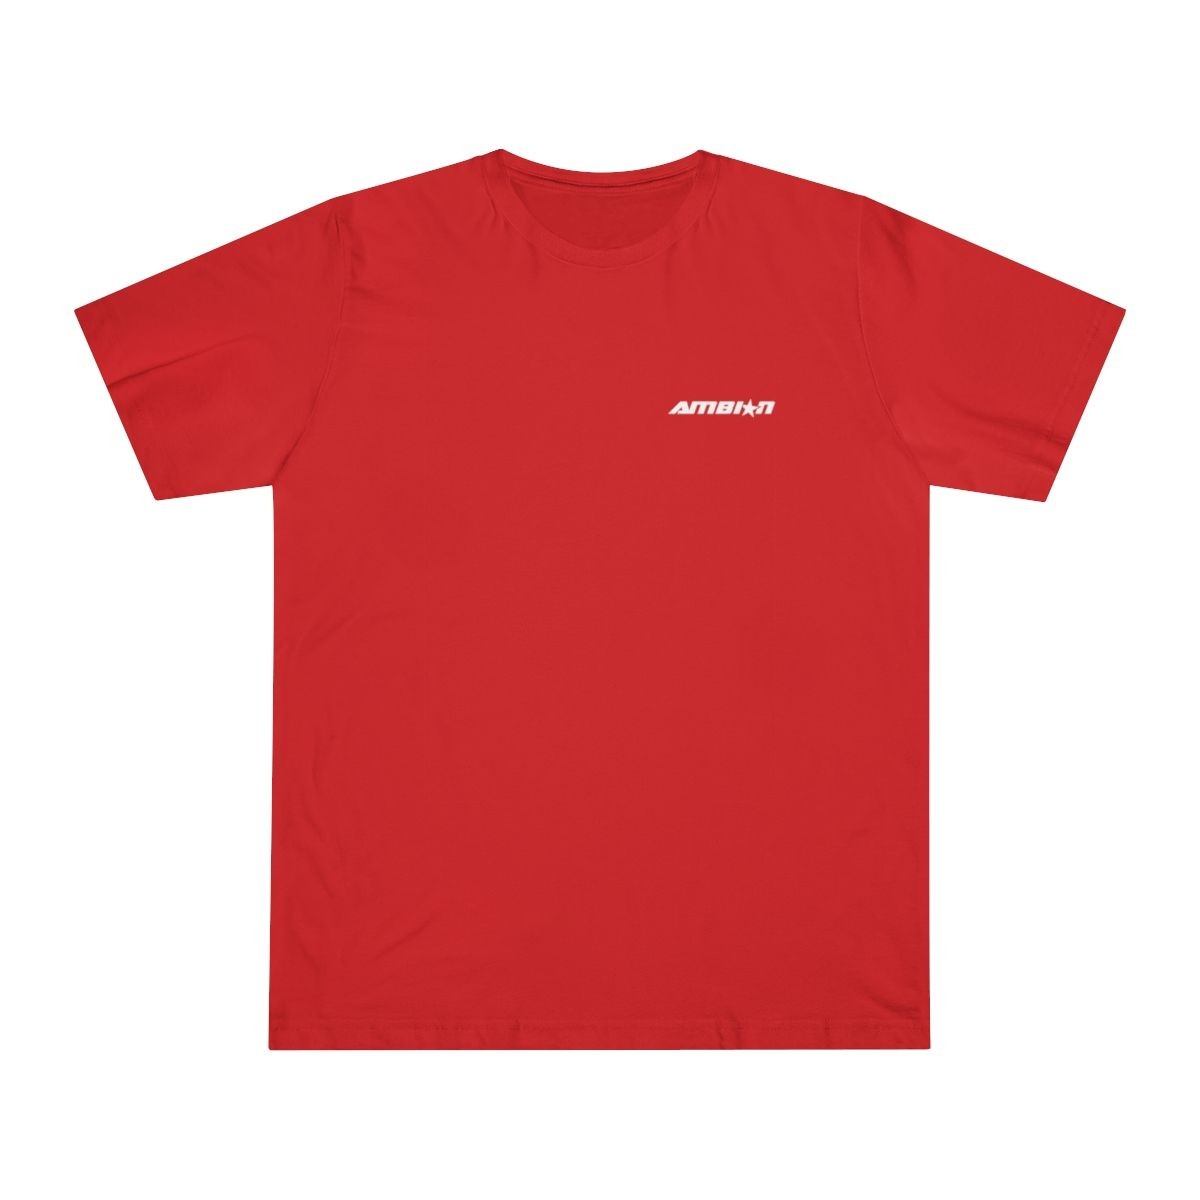 Vibrant Fiery Red Shirt. Affordable plain red shirt with logo